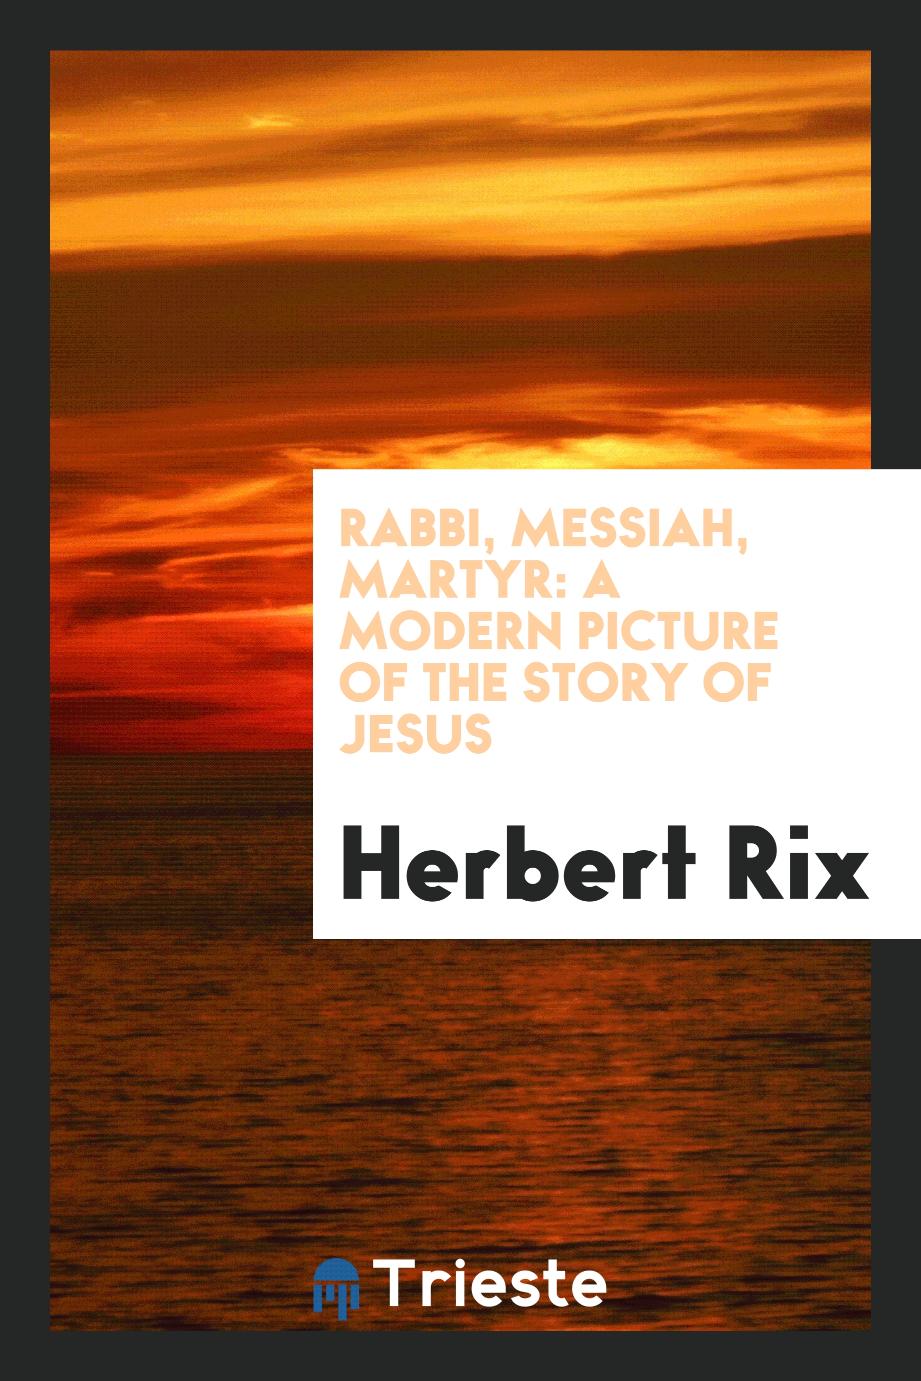 Rabbi, Messiah, Martyr: A Modern Picture of the Story of Jesus